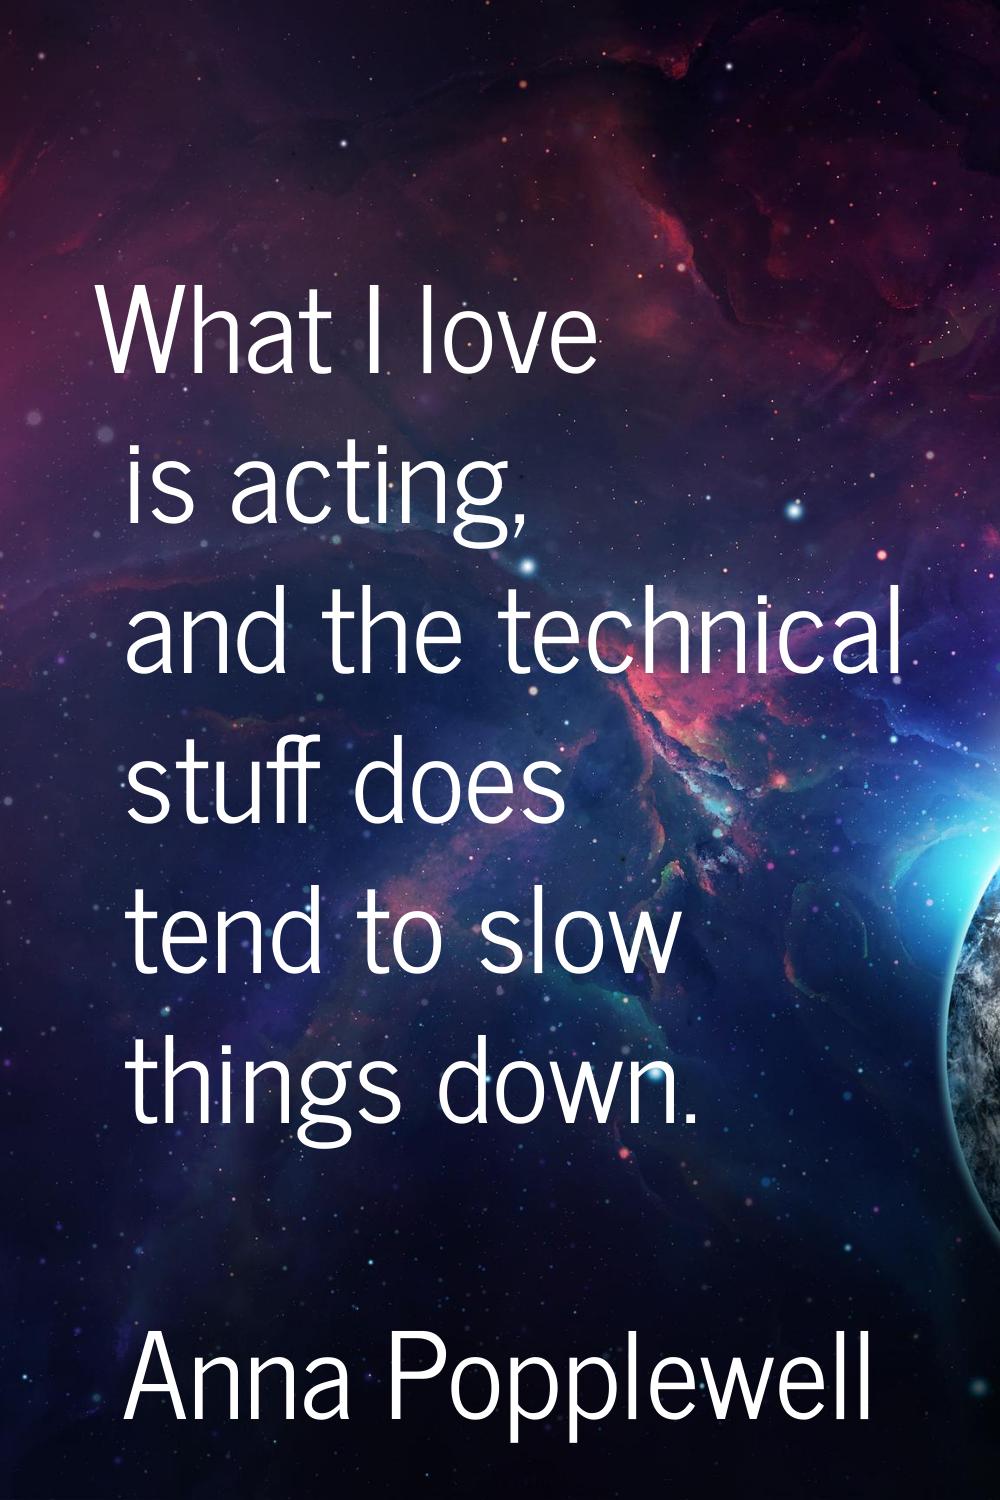 What I love is acting, and the technical stuff does tend to slow things down.